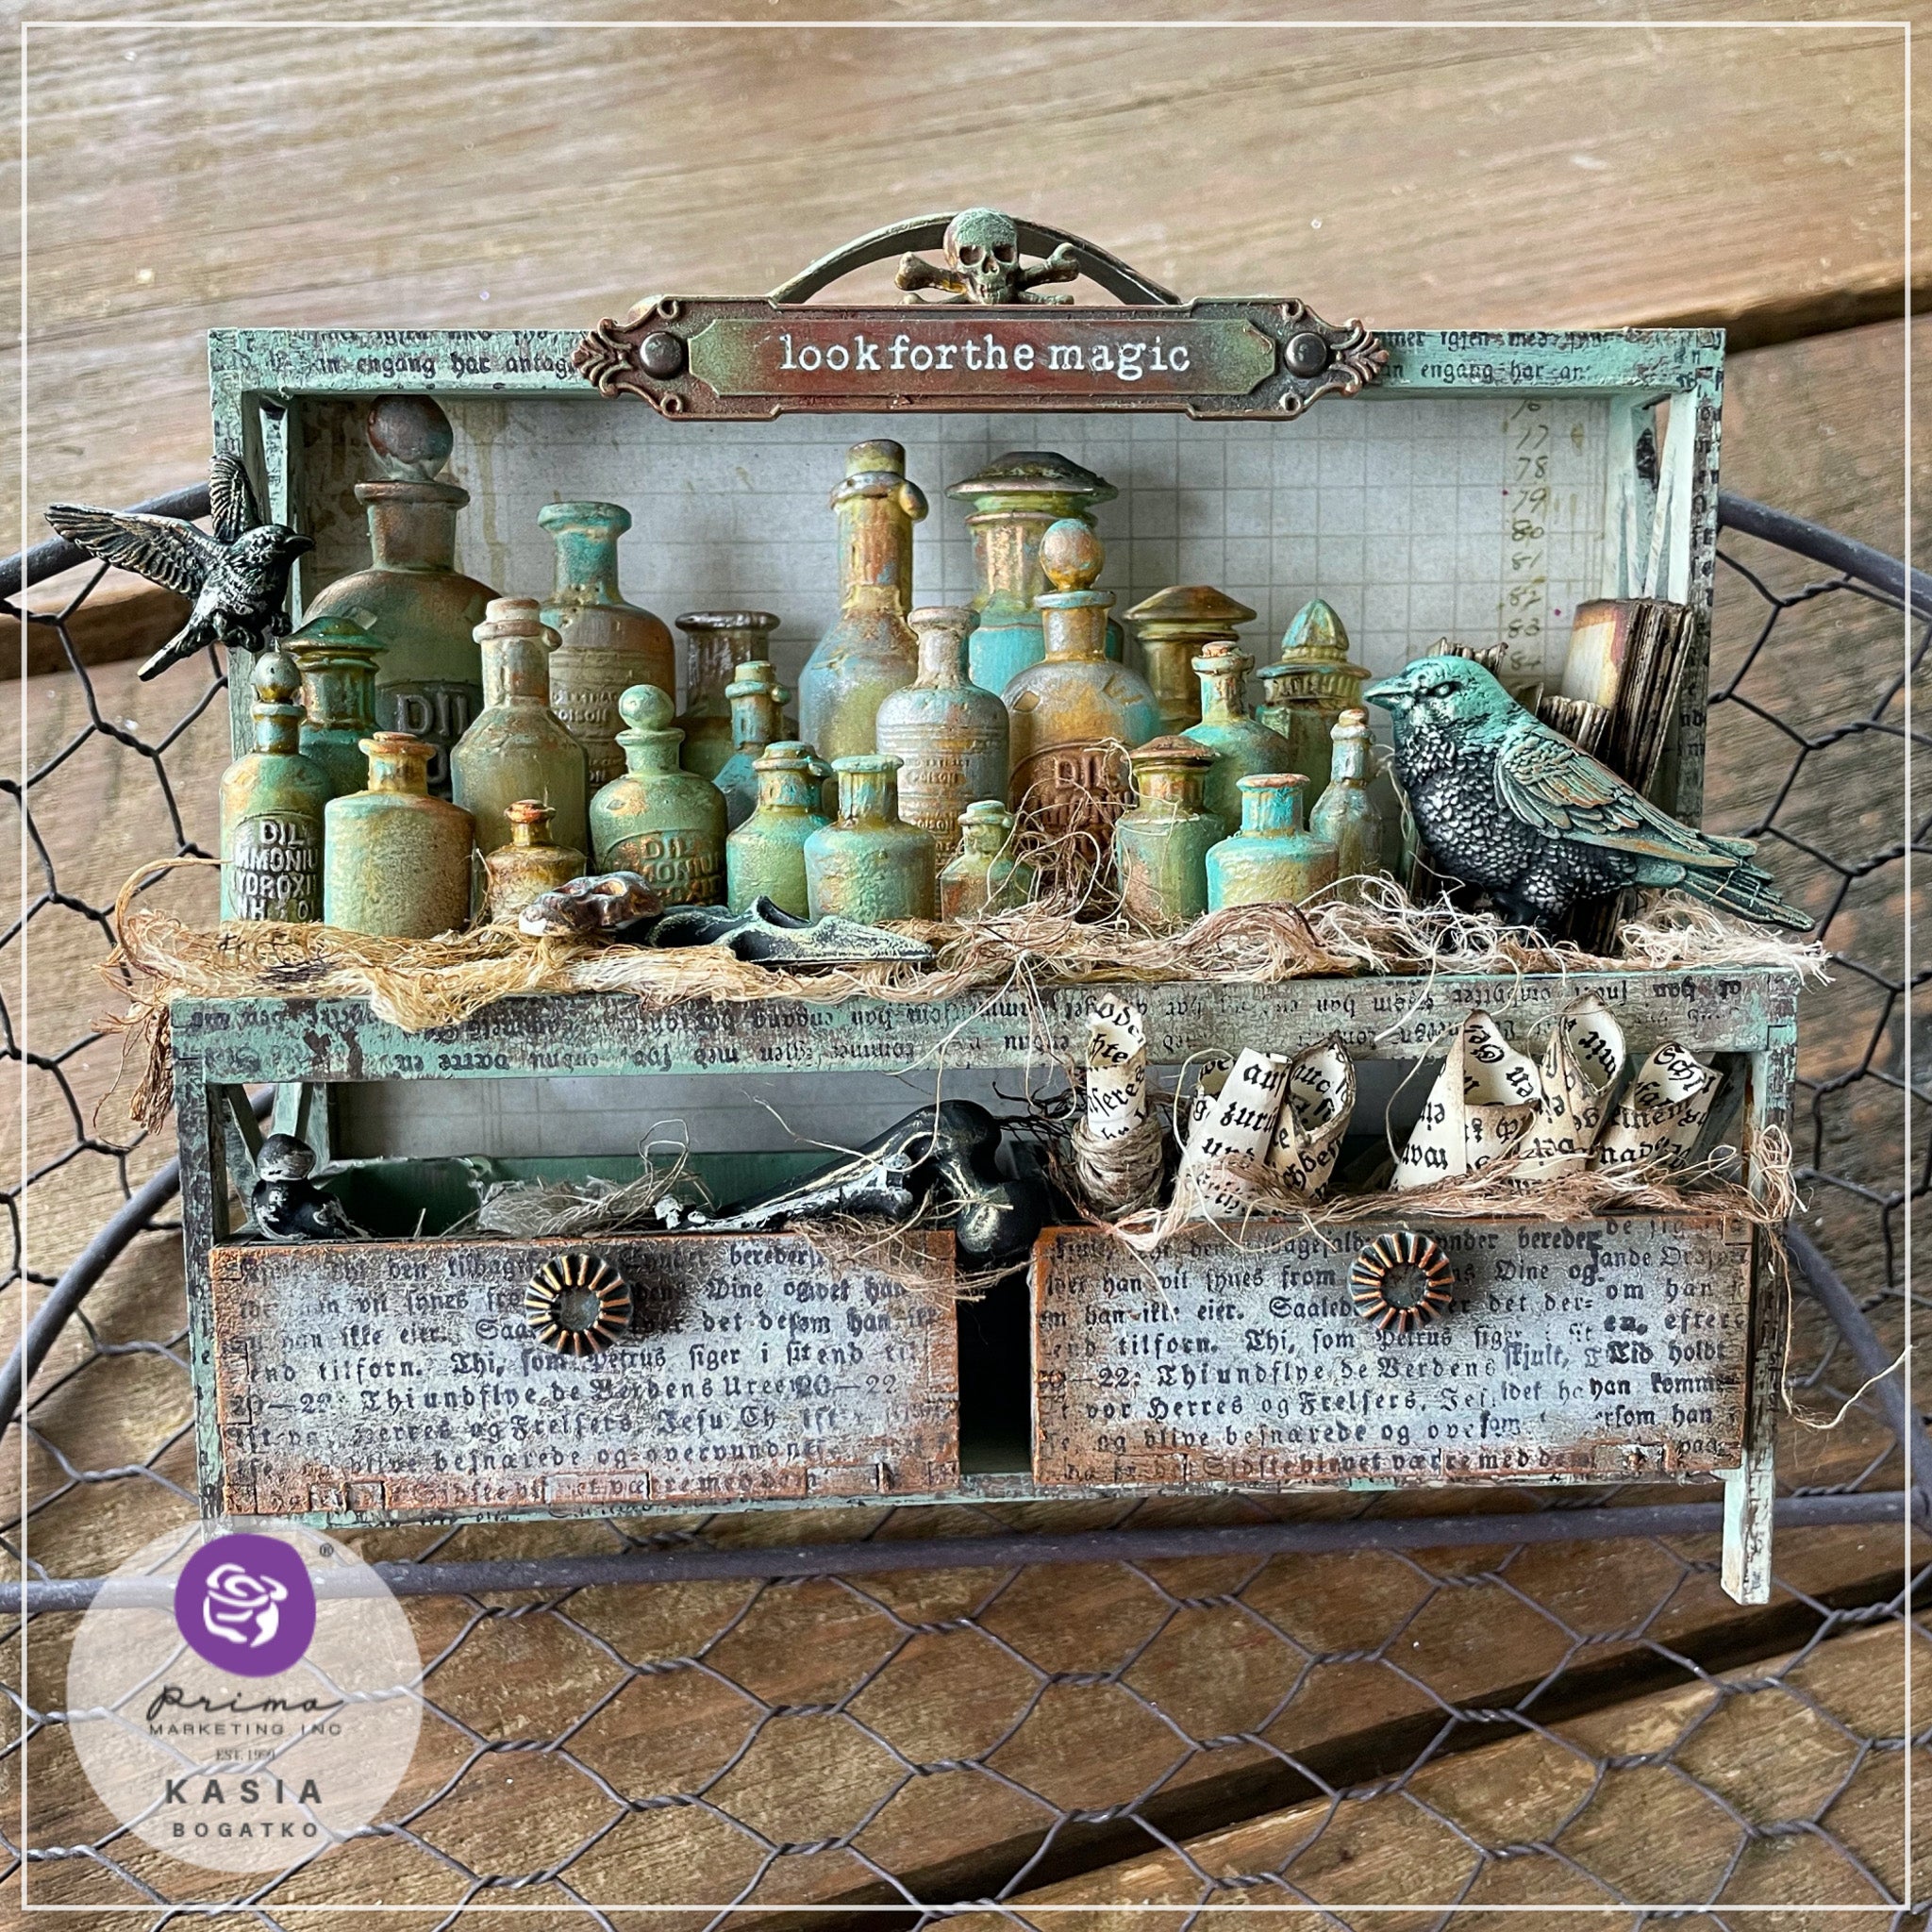 Rustic patina-colored silicone mold castings from Finnabair's Apothecary Bottles Silicone Mold are set up on a spooky decorated shelf